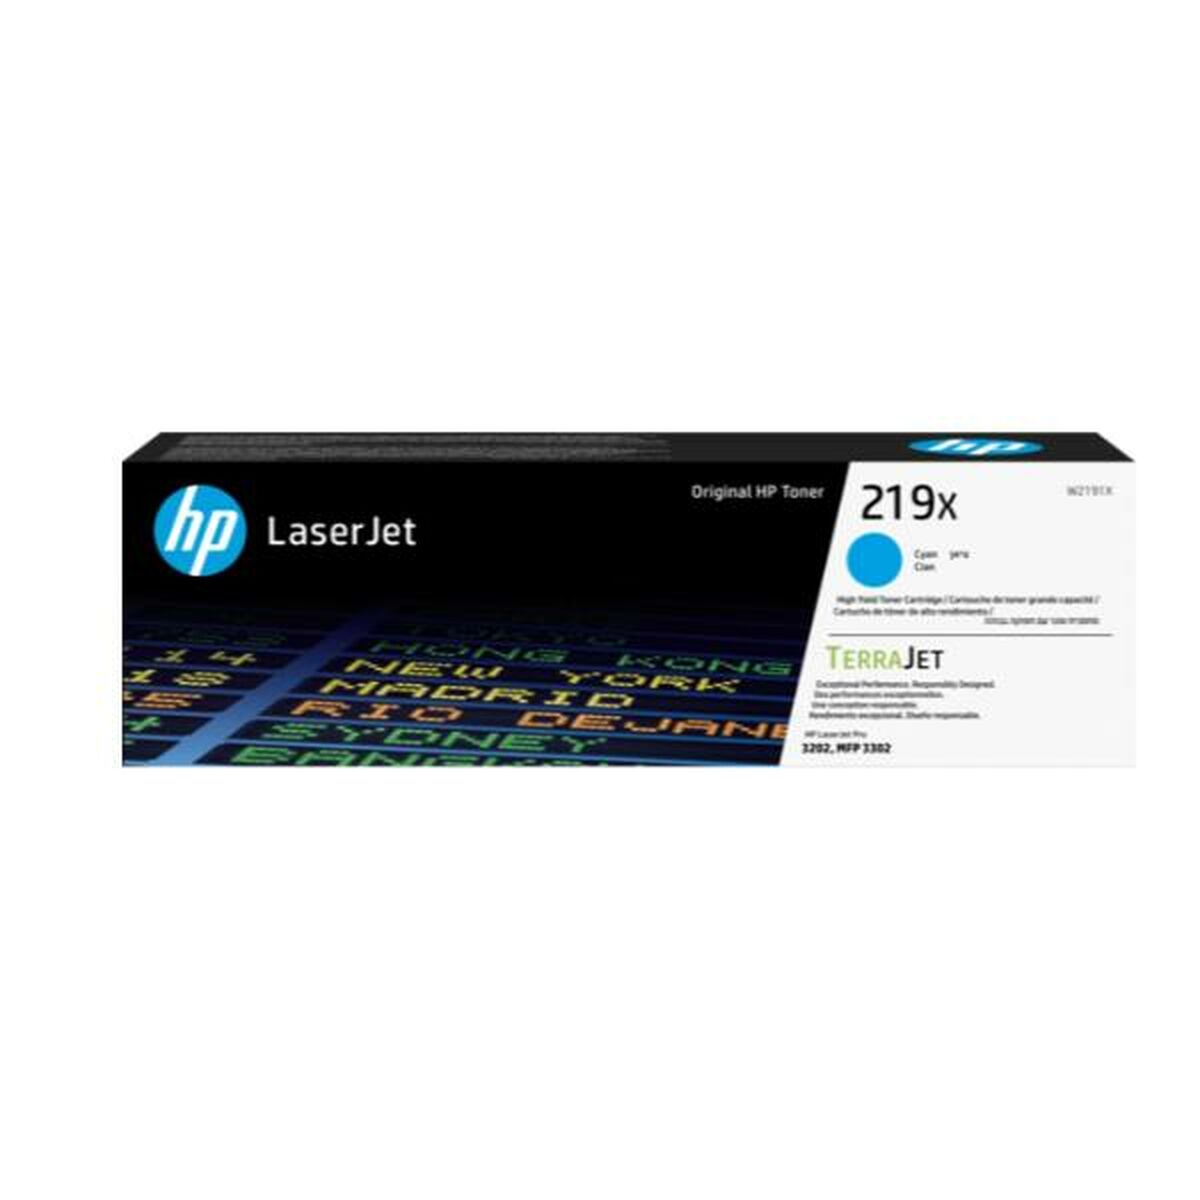 Toner HP W2191X Cyan, HP, Computing, Printers and accessories, toner-hp-w2191x-cyan, Brand_HP, category-reference-2609, category-reference-2642, category-reference-2876, category-reference-t-19685, category-reference-t-19911, category-reference-t-21377, category-reference-t-25688, category-reference-t-29849, Condition_NEW, office, Price_100 - 200, Teleworking, RiotNook